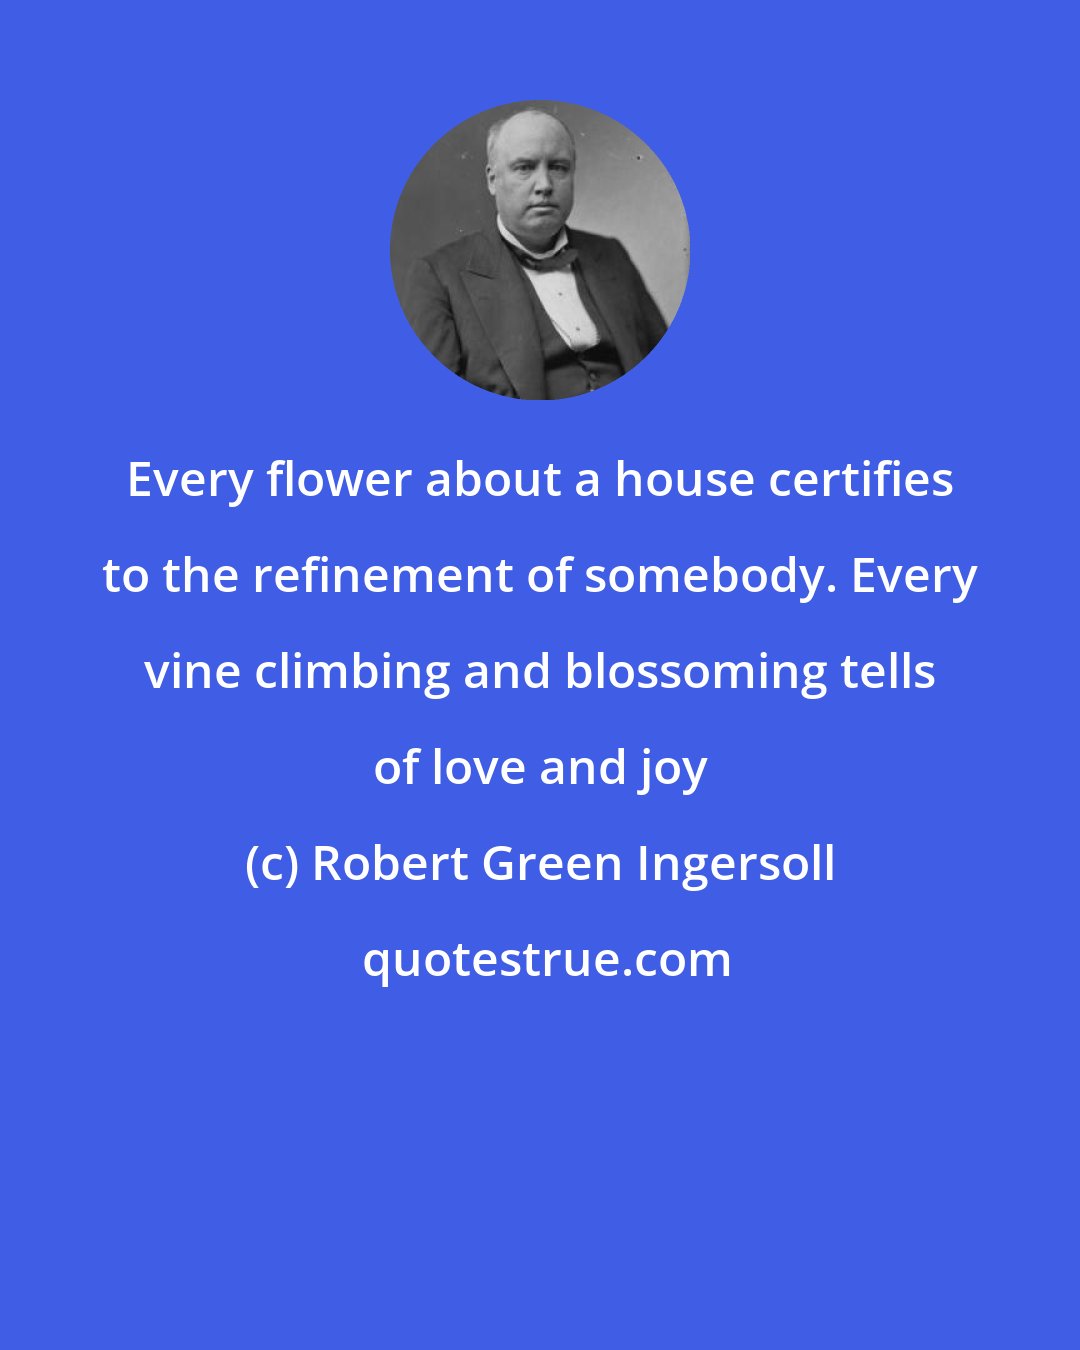 Robert Green Ingersoll: Every flower about a house certifies to the refinement of somebody. Every vine climbing and blossoming tells of love and joy